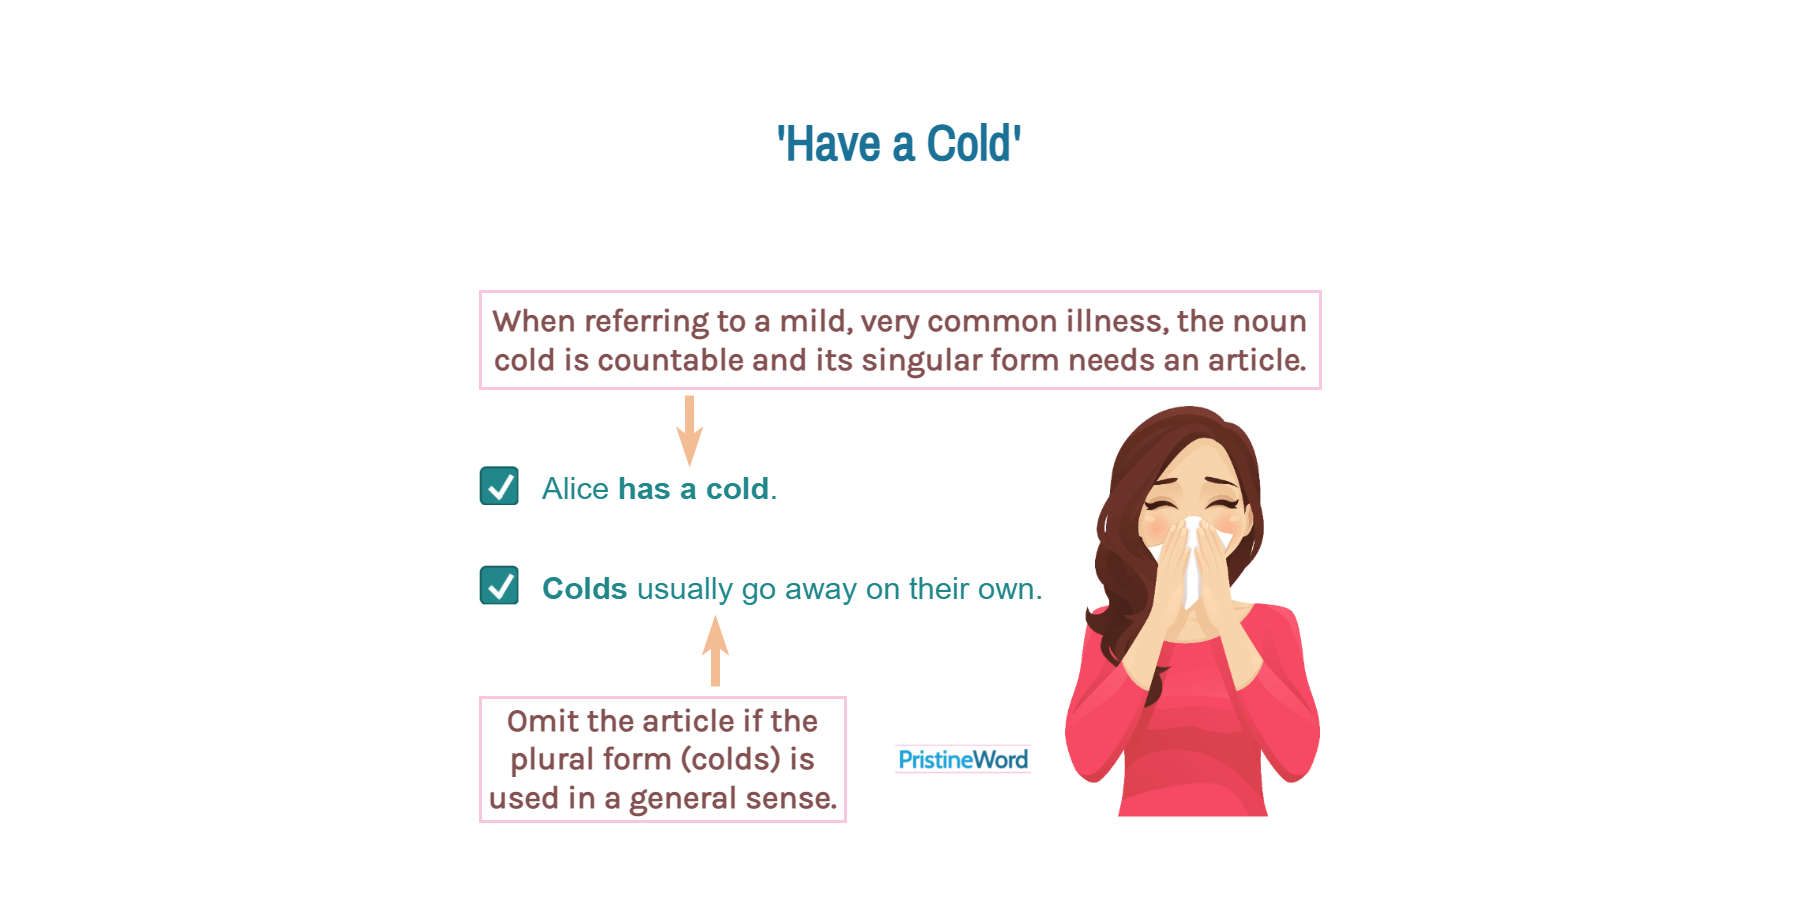 Is it 'Have a Cold' or 'Have Cold'?